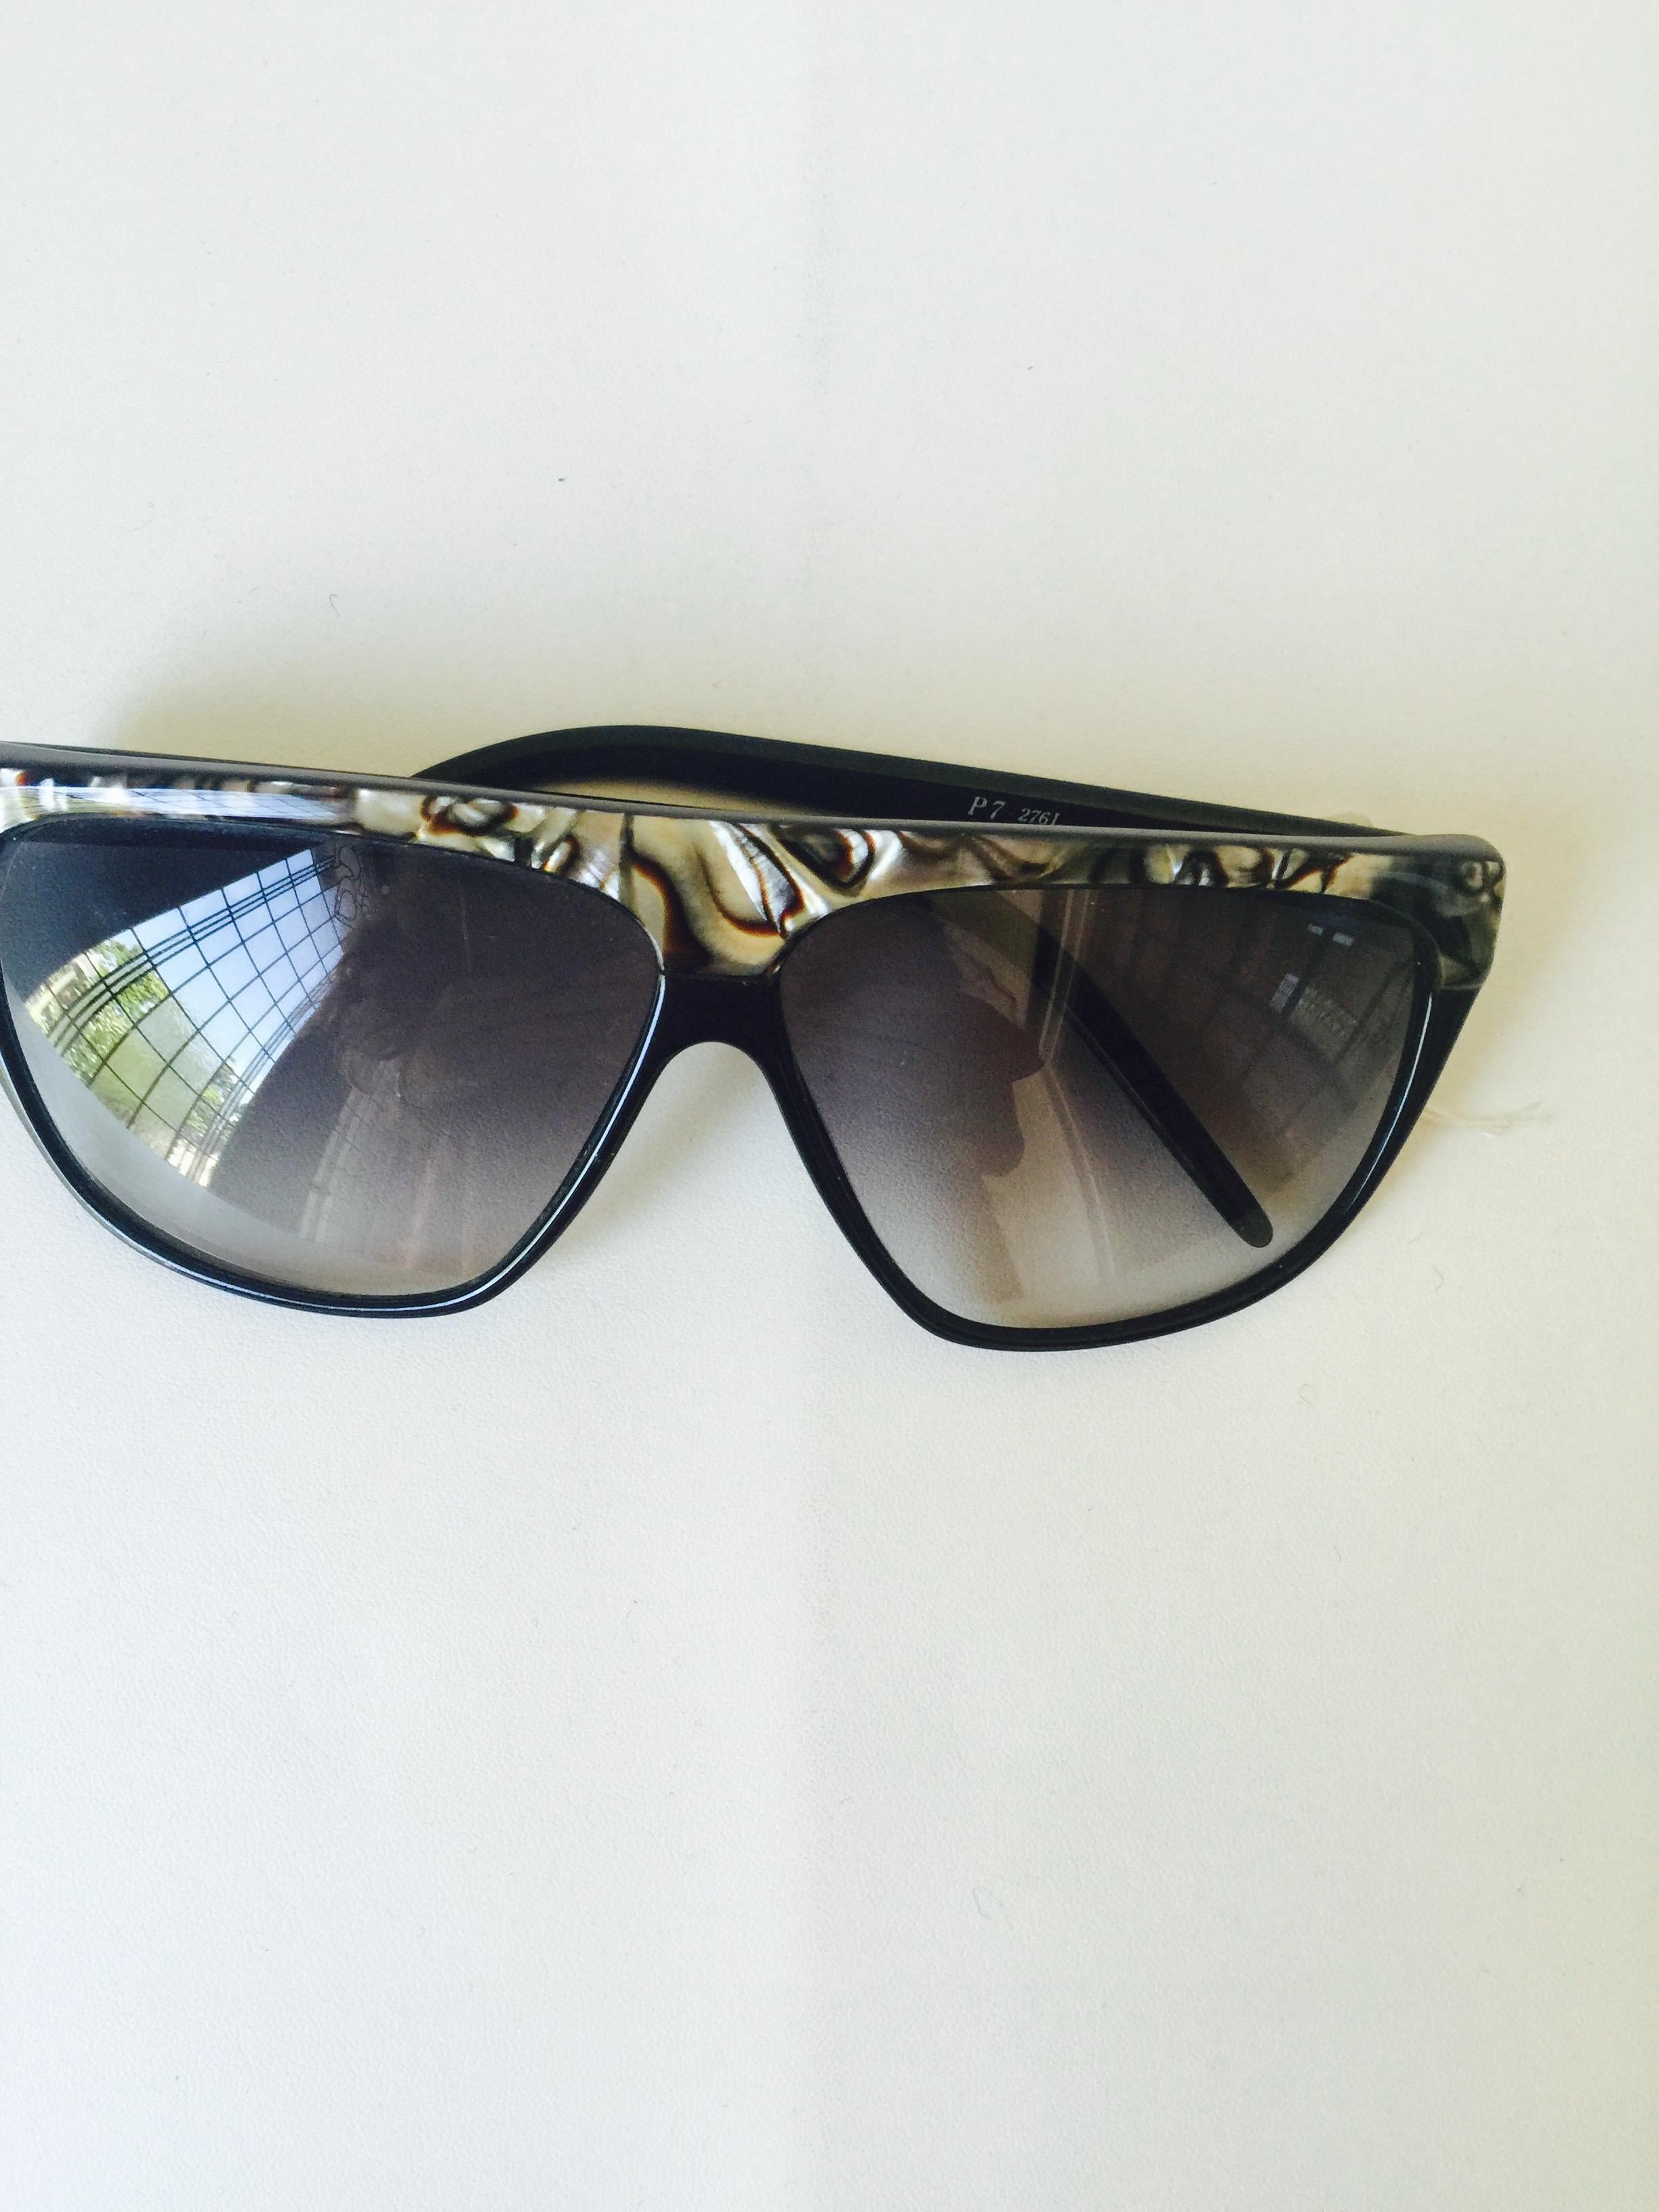 Oversized Laura Biagiotti sunglasses with inlay trim
Comes with lovely green case.